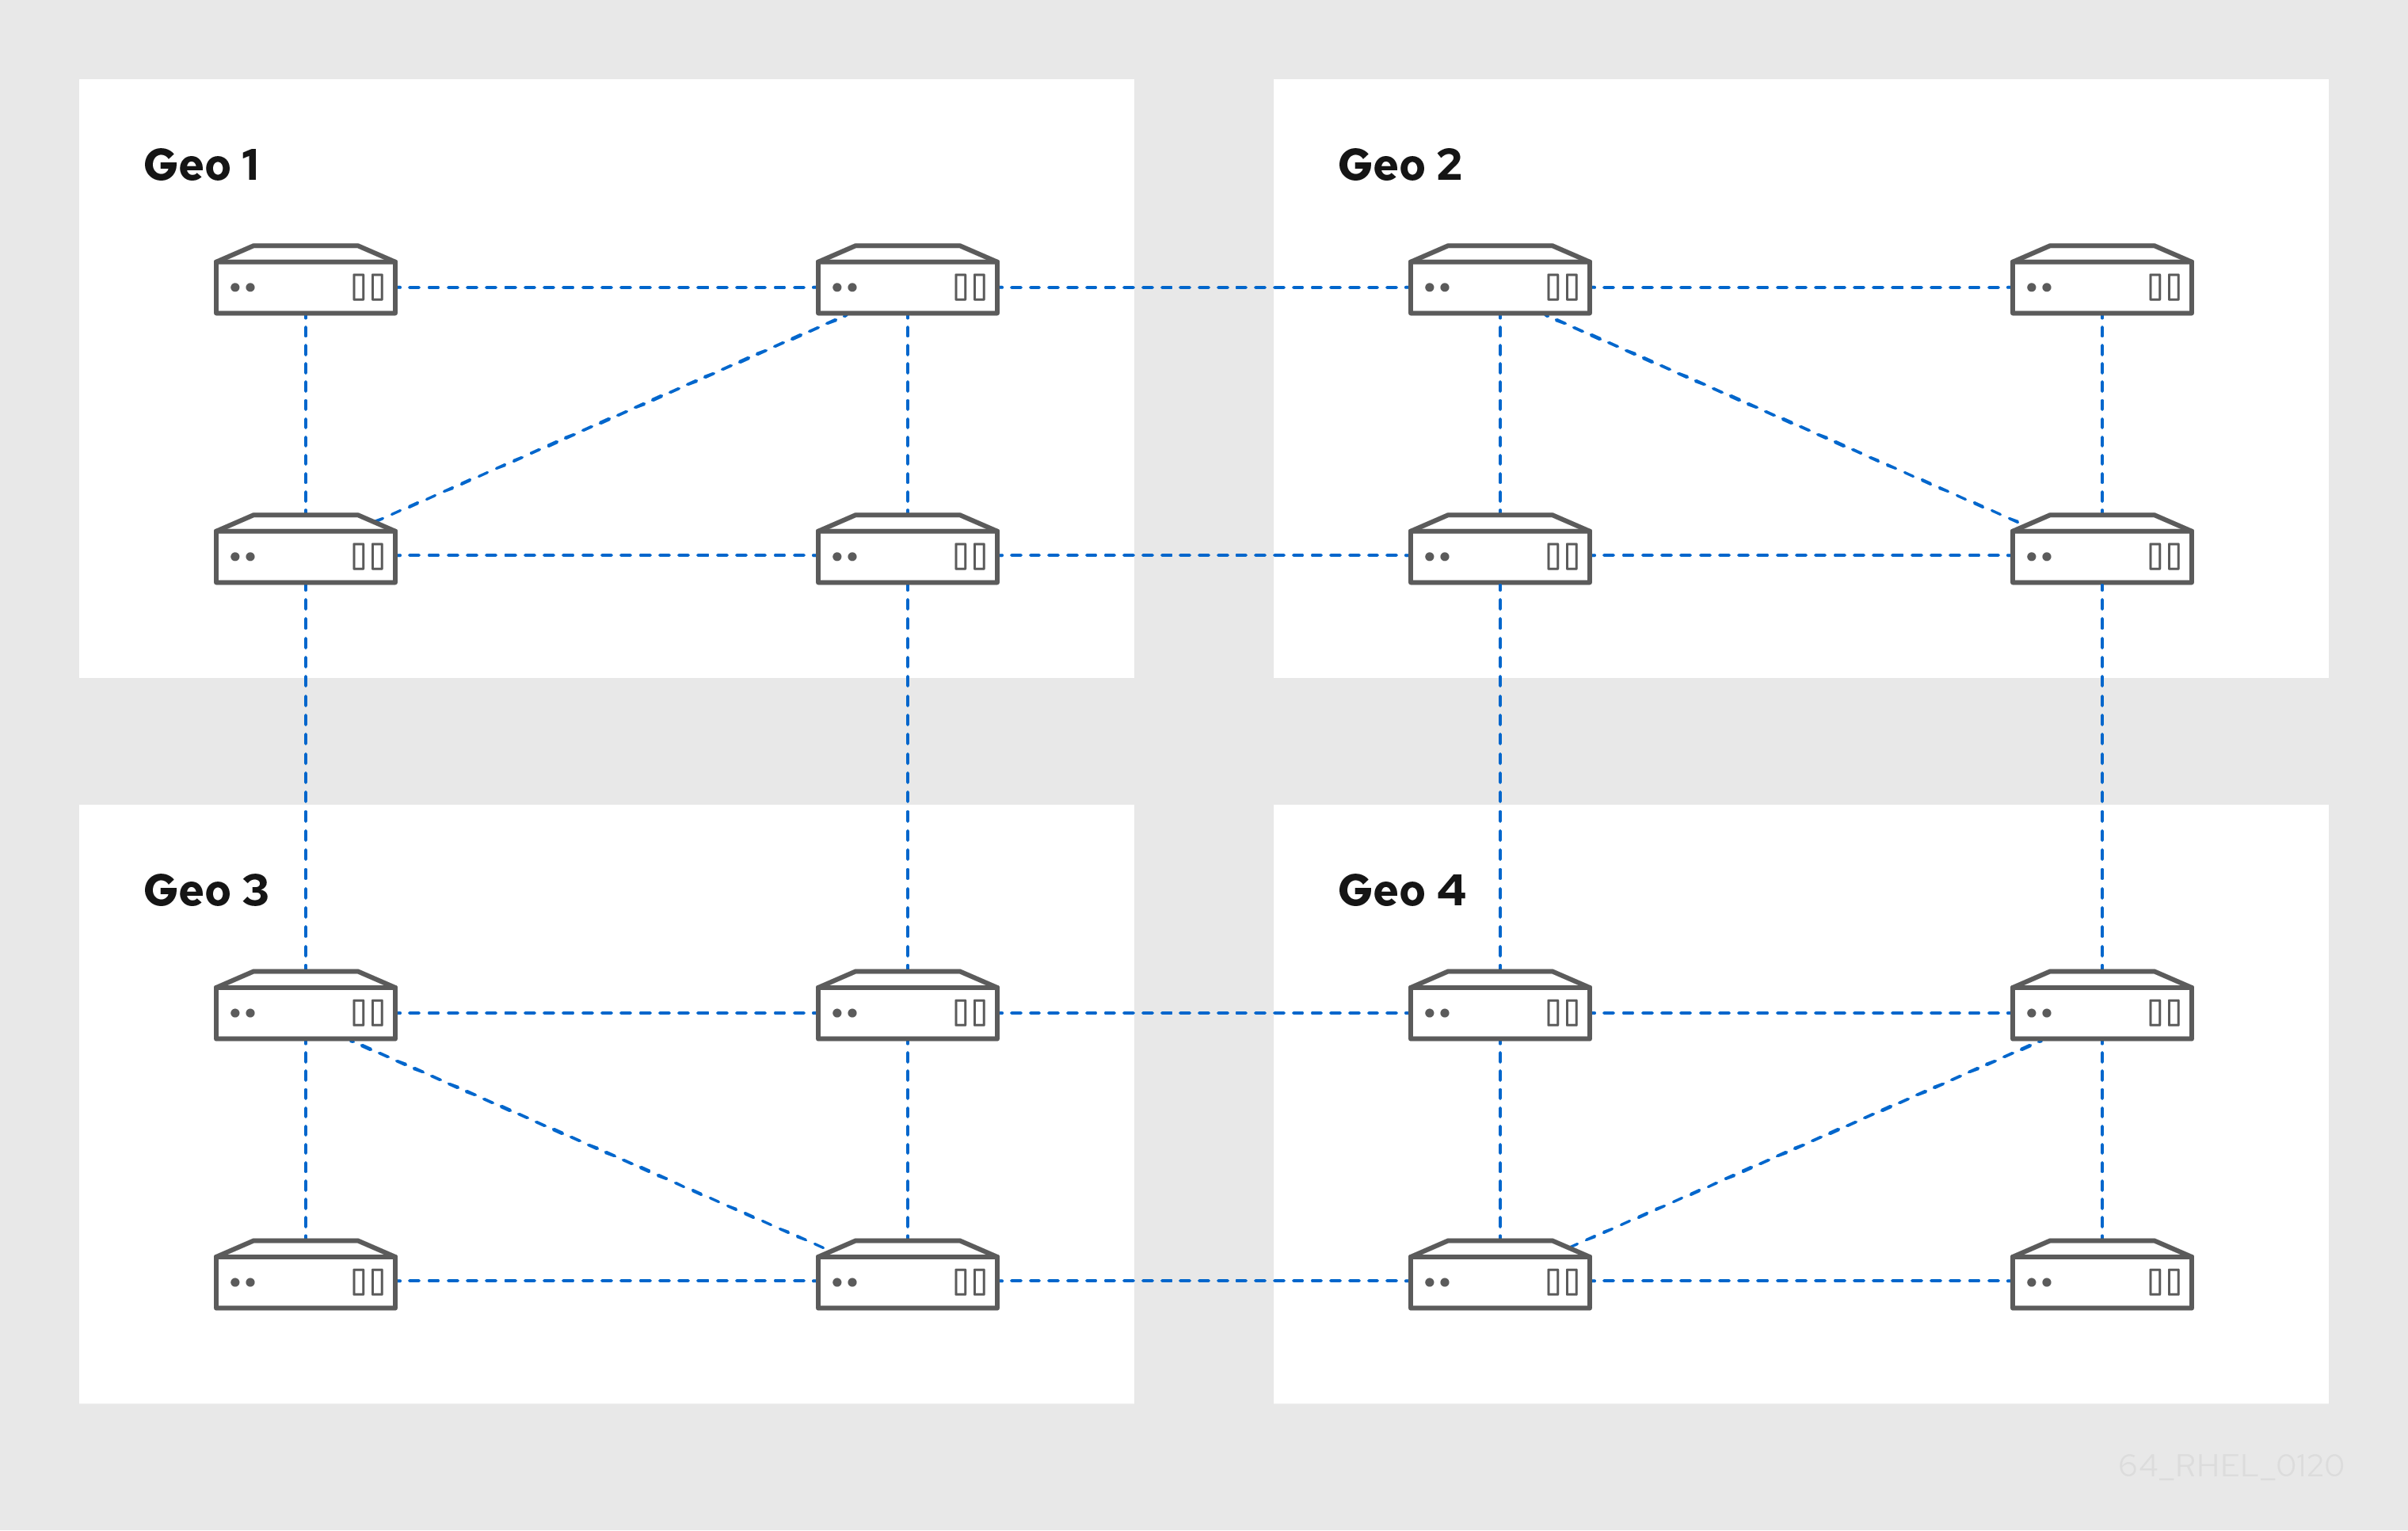 A diagram showing 4 data centers - Geo 1 through 4. Each data center has four servers connected to each other with replication agreements. There are also replication agreements connecting two servers from Geo 1 to two servers in Geo 2. This pattern continues with two servers in Geo 2 connected to two servers in Geo 3 and two servers in Geo 3 connected to Geo 4. This connects each data center so each server is at most 3 hops away from another Geo.